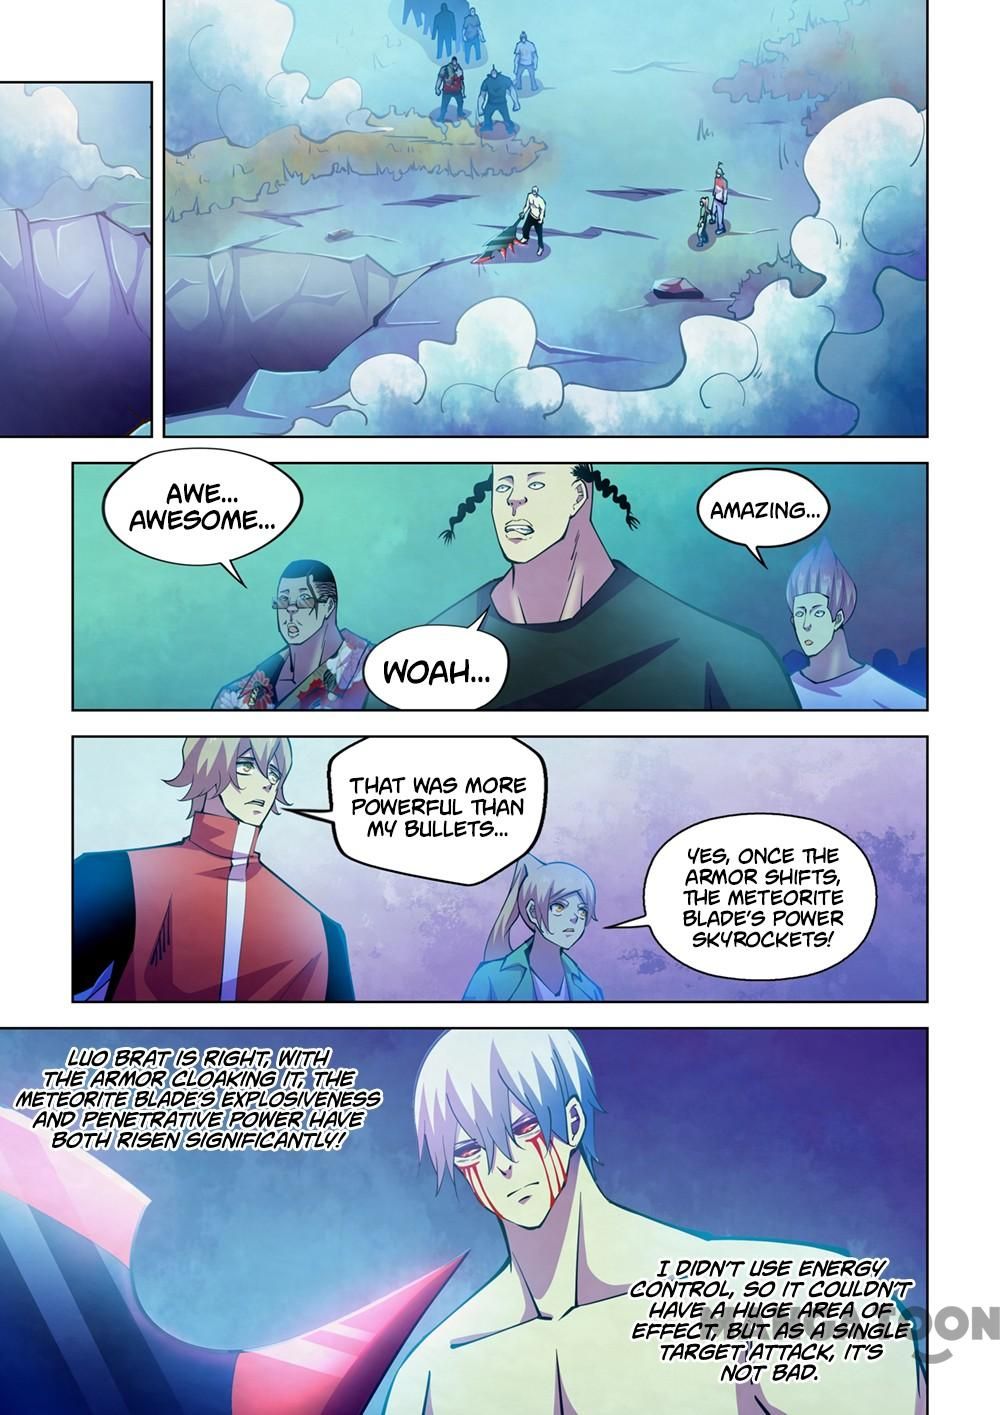 The Last Human Chapter 247 - Page 1